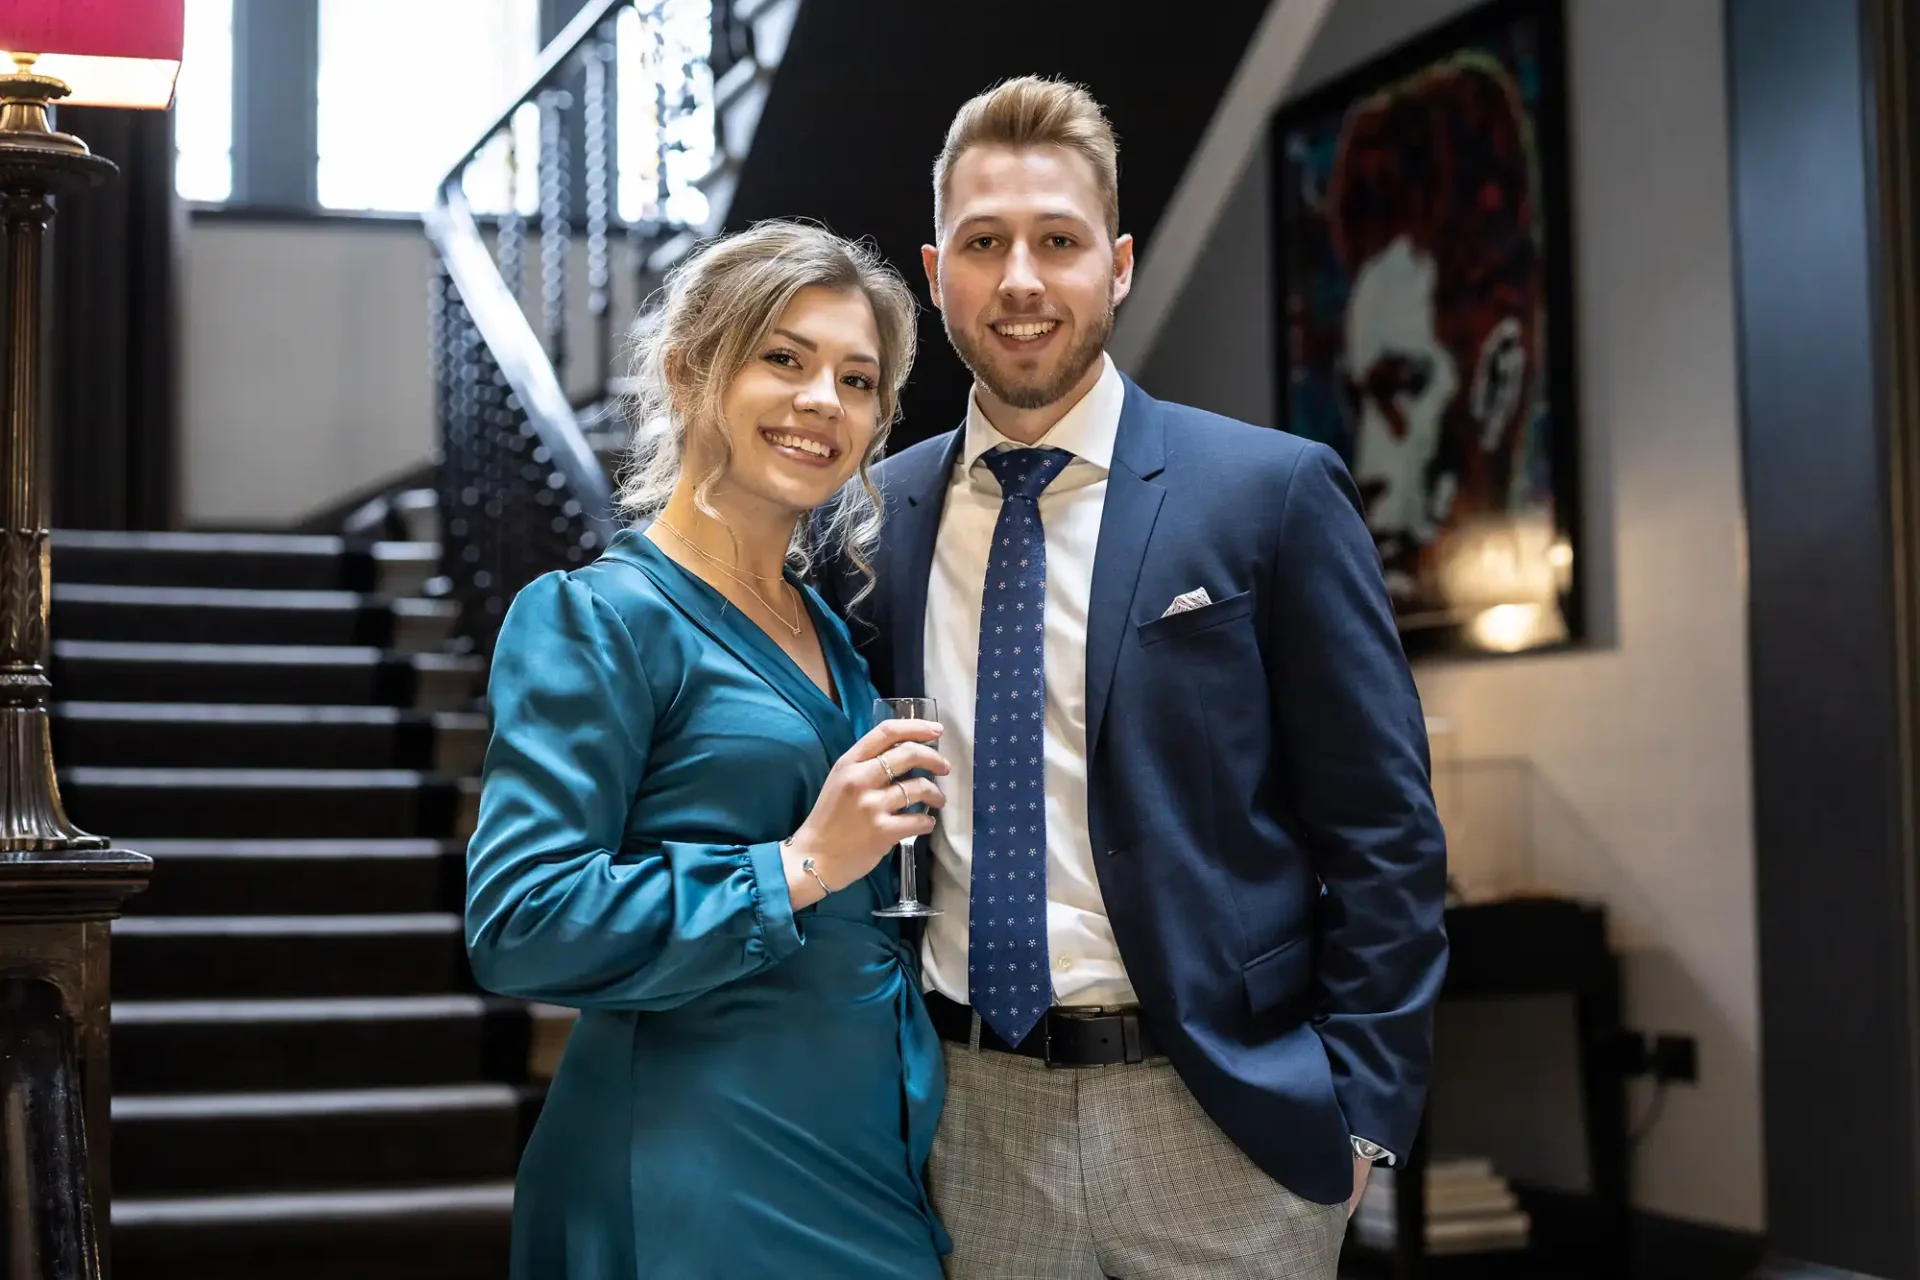 A smiling woman in a teal dress and a man in a suit holding a glass of champagne, standing together in an elegant hallway with a staircase.